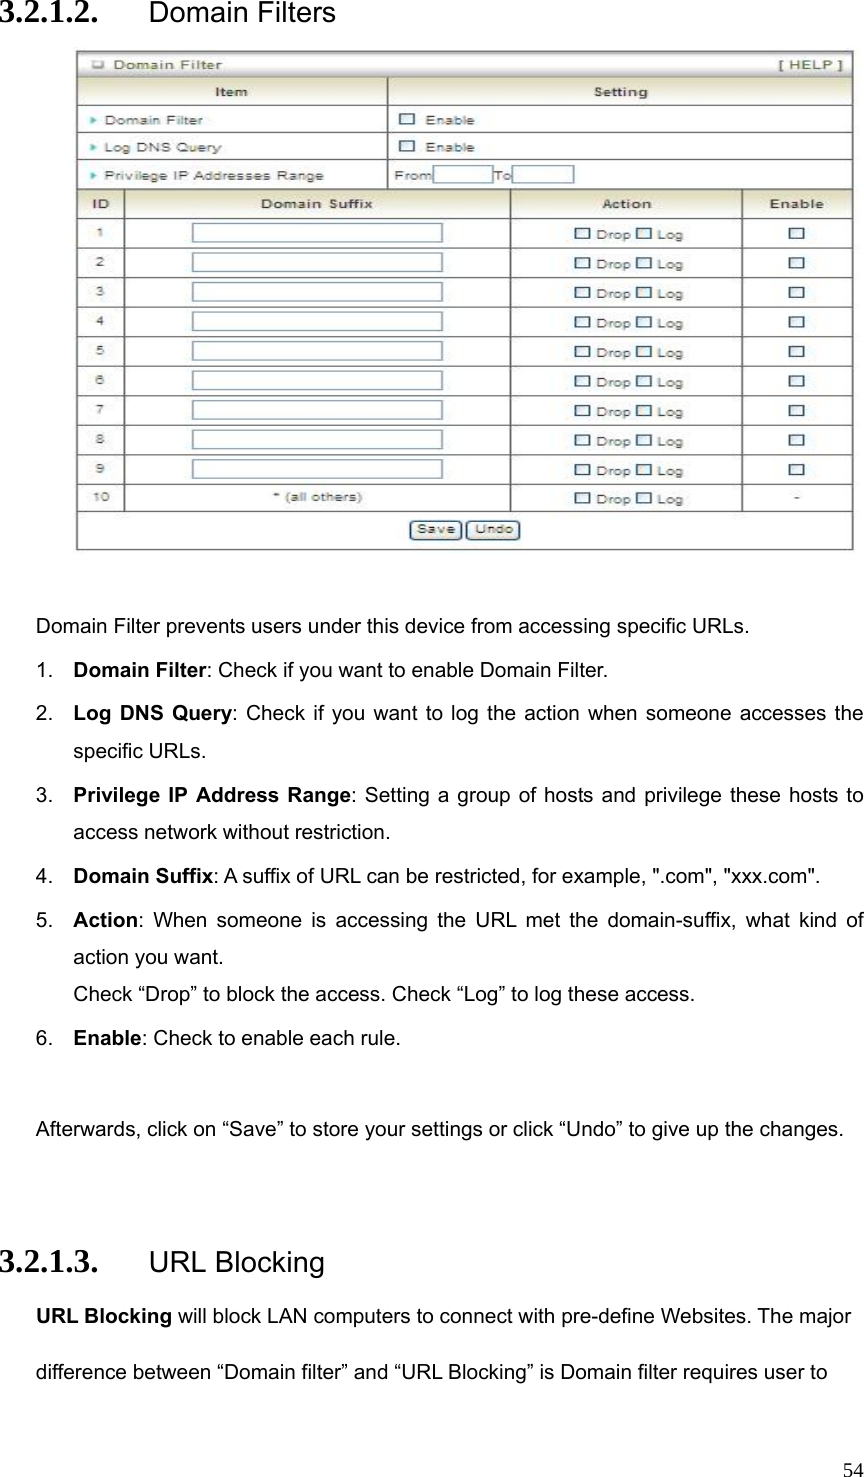  543.2.1.2. Domain Filters   Domain Filter prevents users under this device from accessing specific URLs.   1.  Domain Filter: Check if you want to enable Domain Filter.   2.  Log DNS Query: Check if you want to log the action when someone accesses the specific URLs.   3.  Privilege IP Address Range: Setting a group of hosts and privilege these hosts to access network without restriction.   4.  Domain Suffix: A suffix of URL can be restricted, for example, &quot;.com&quot;, &quot;xxx.com&quot;.   5.  Action: When someone is accessing the URL met the domain-suffix, what kind of action you want. Check “Drop” to block the access. Check “Log” to log these access.   6.  Enable: Check to enable each rule.    Afterwards, click on “Save” to store your settings or click “Undo” to give up the changes.  3.2.1.3. URL Blocking URL Blocking will block LAN computers to connect with pre-define Websites. The major difference between “Domain filter” and “URL Blocking” is Domain filter requires user to 